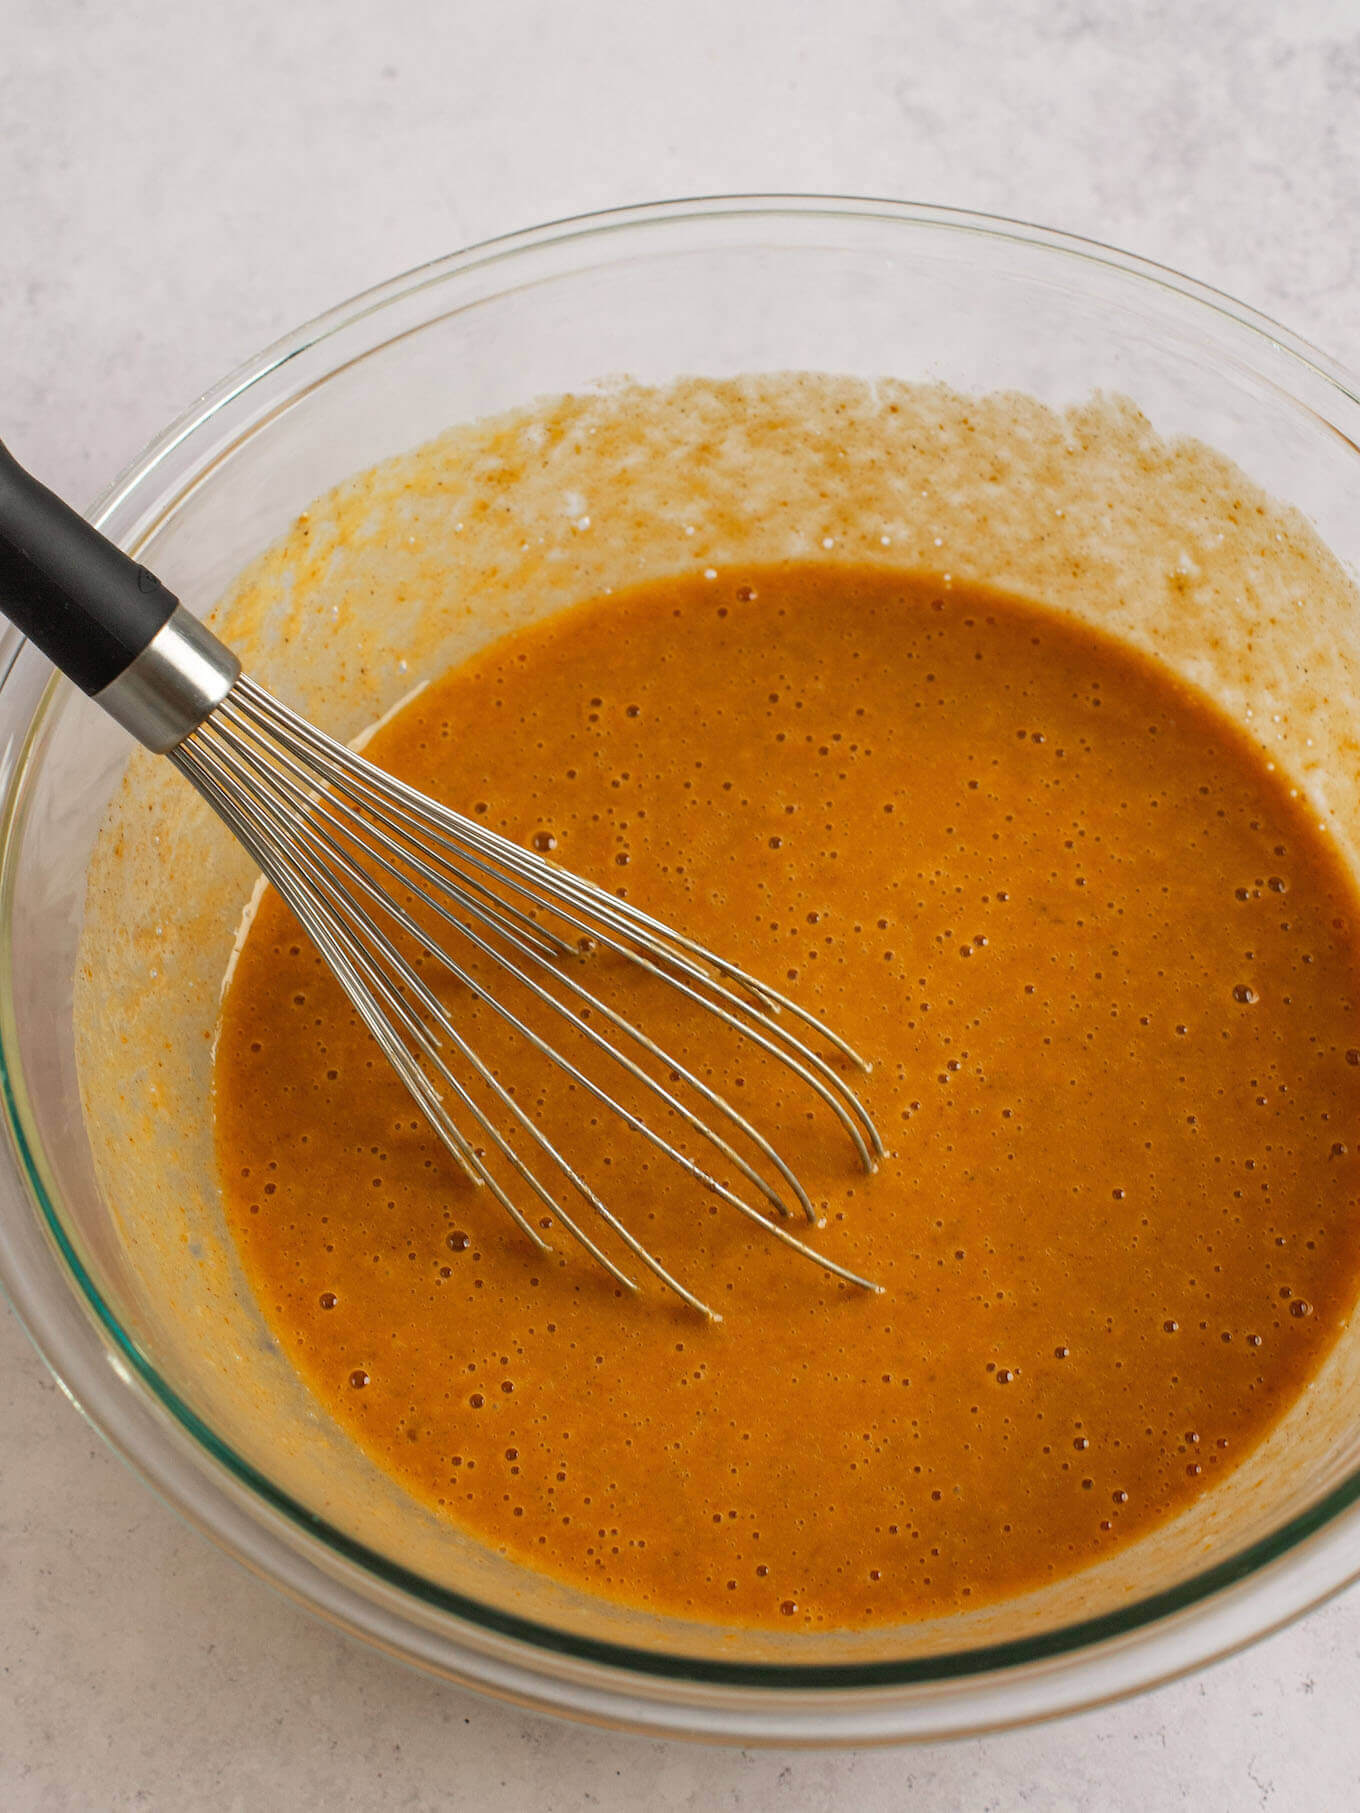 Pumpkin pie filling whisked together in a glass mixing bowl.